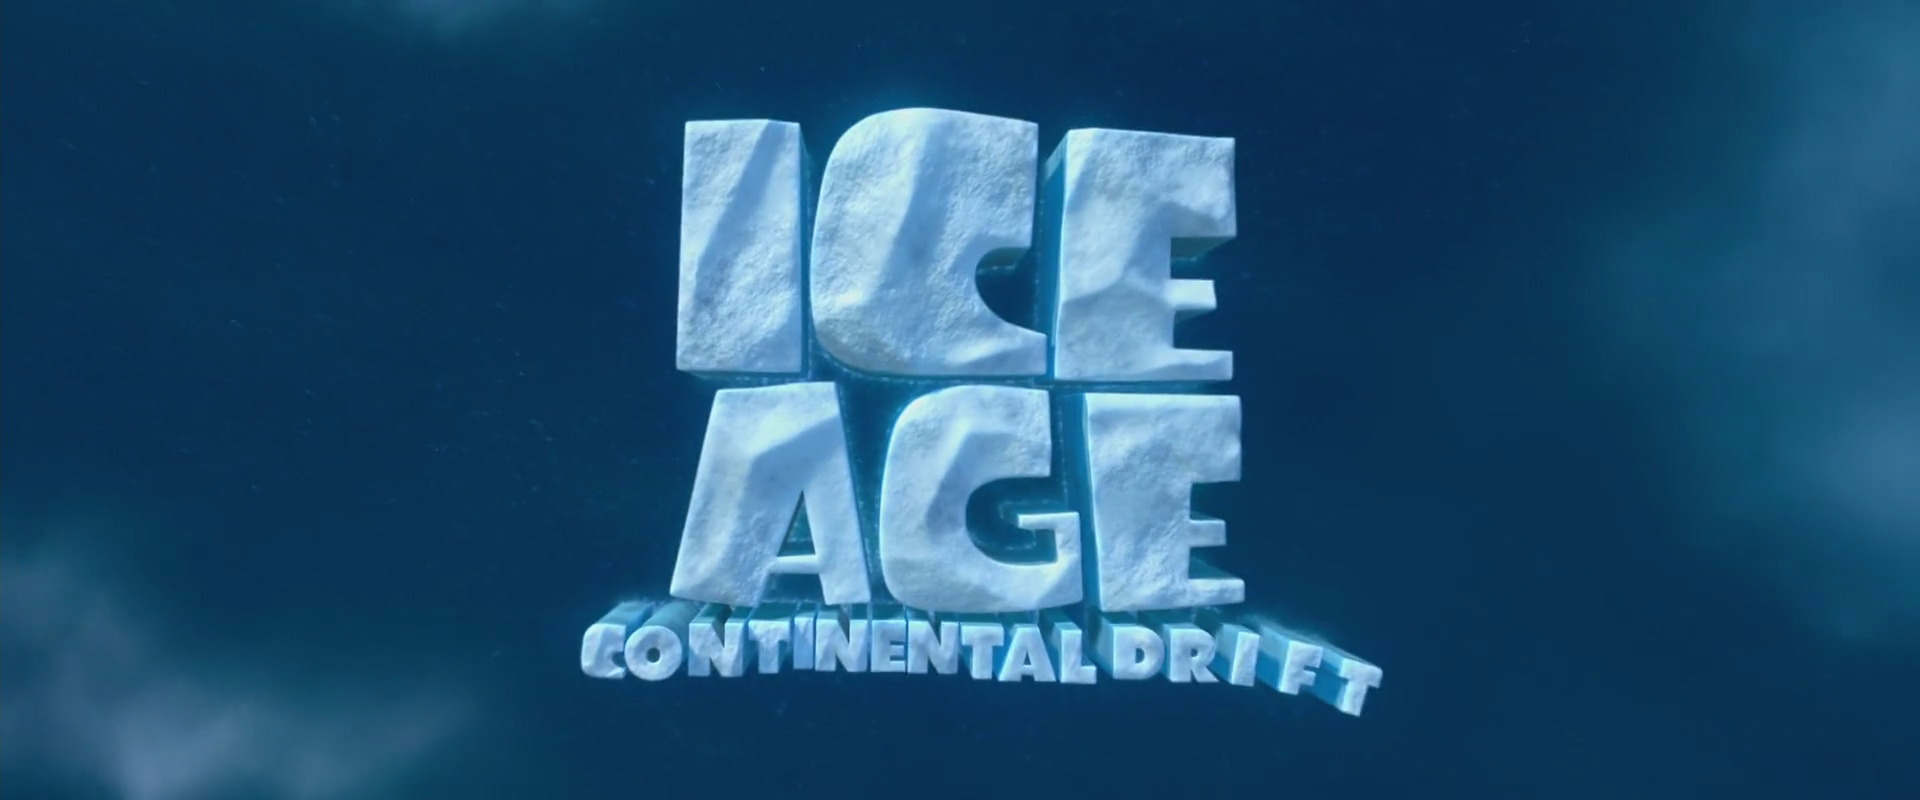 Ice Age: Continental Drift download the last version for iphone